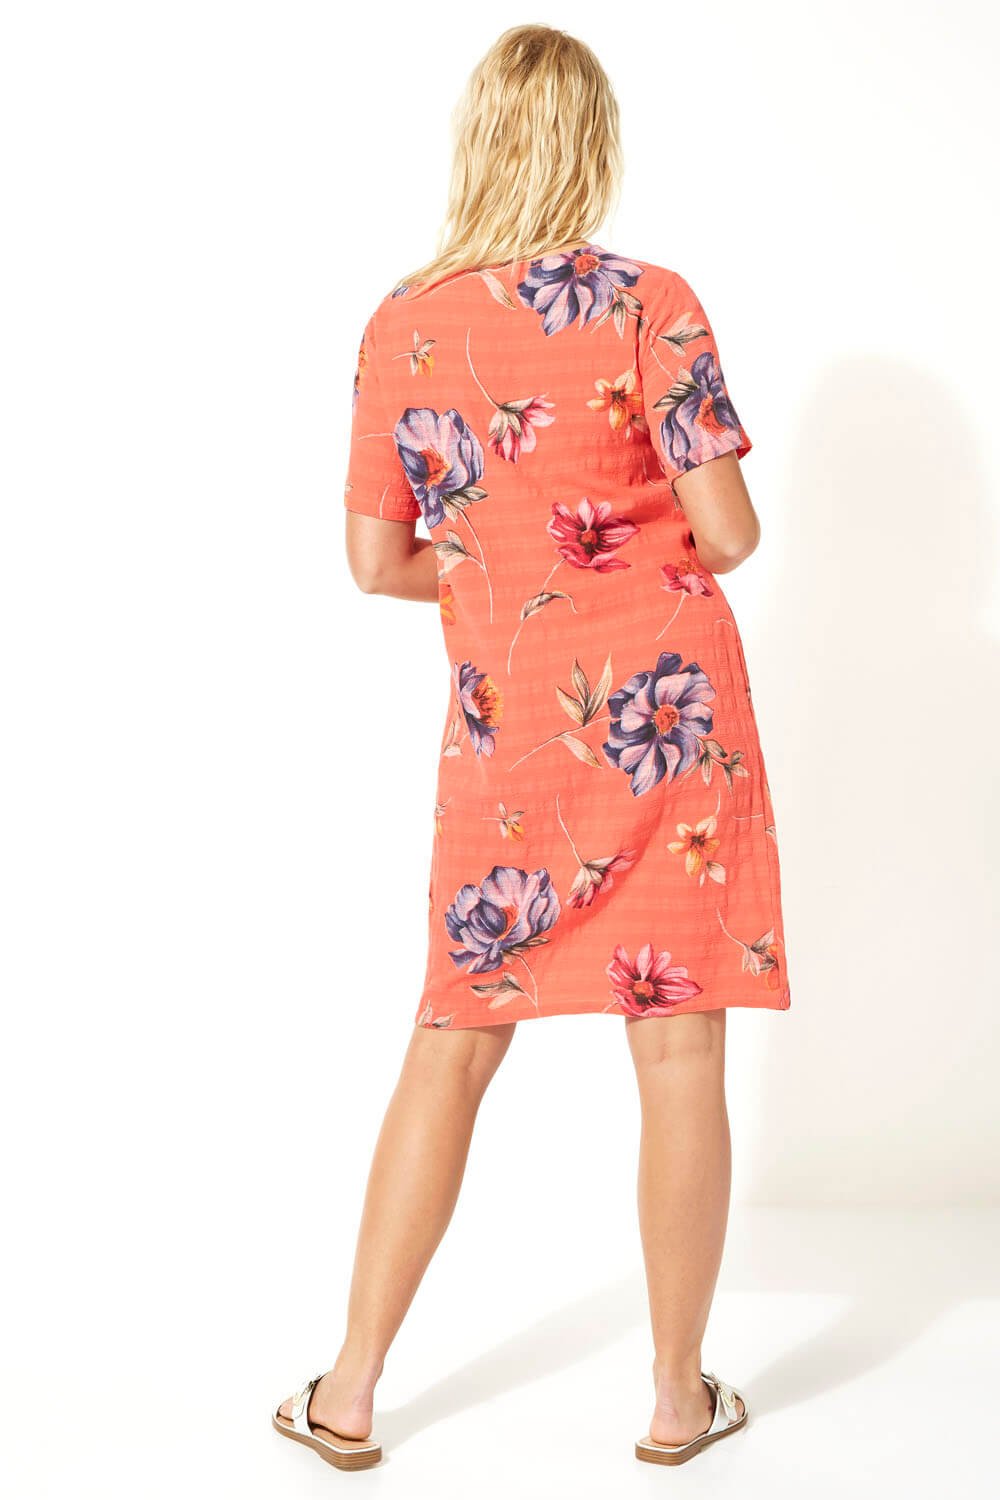 CORAL Floral Textured Cotton Cocoon Dress, Image 3 of 5